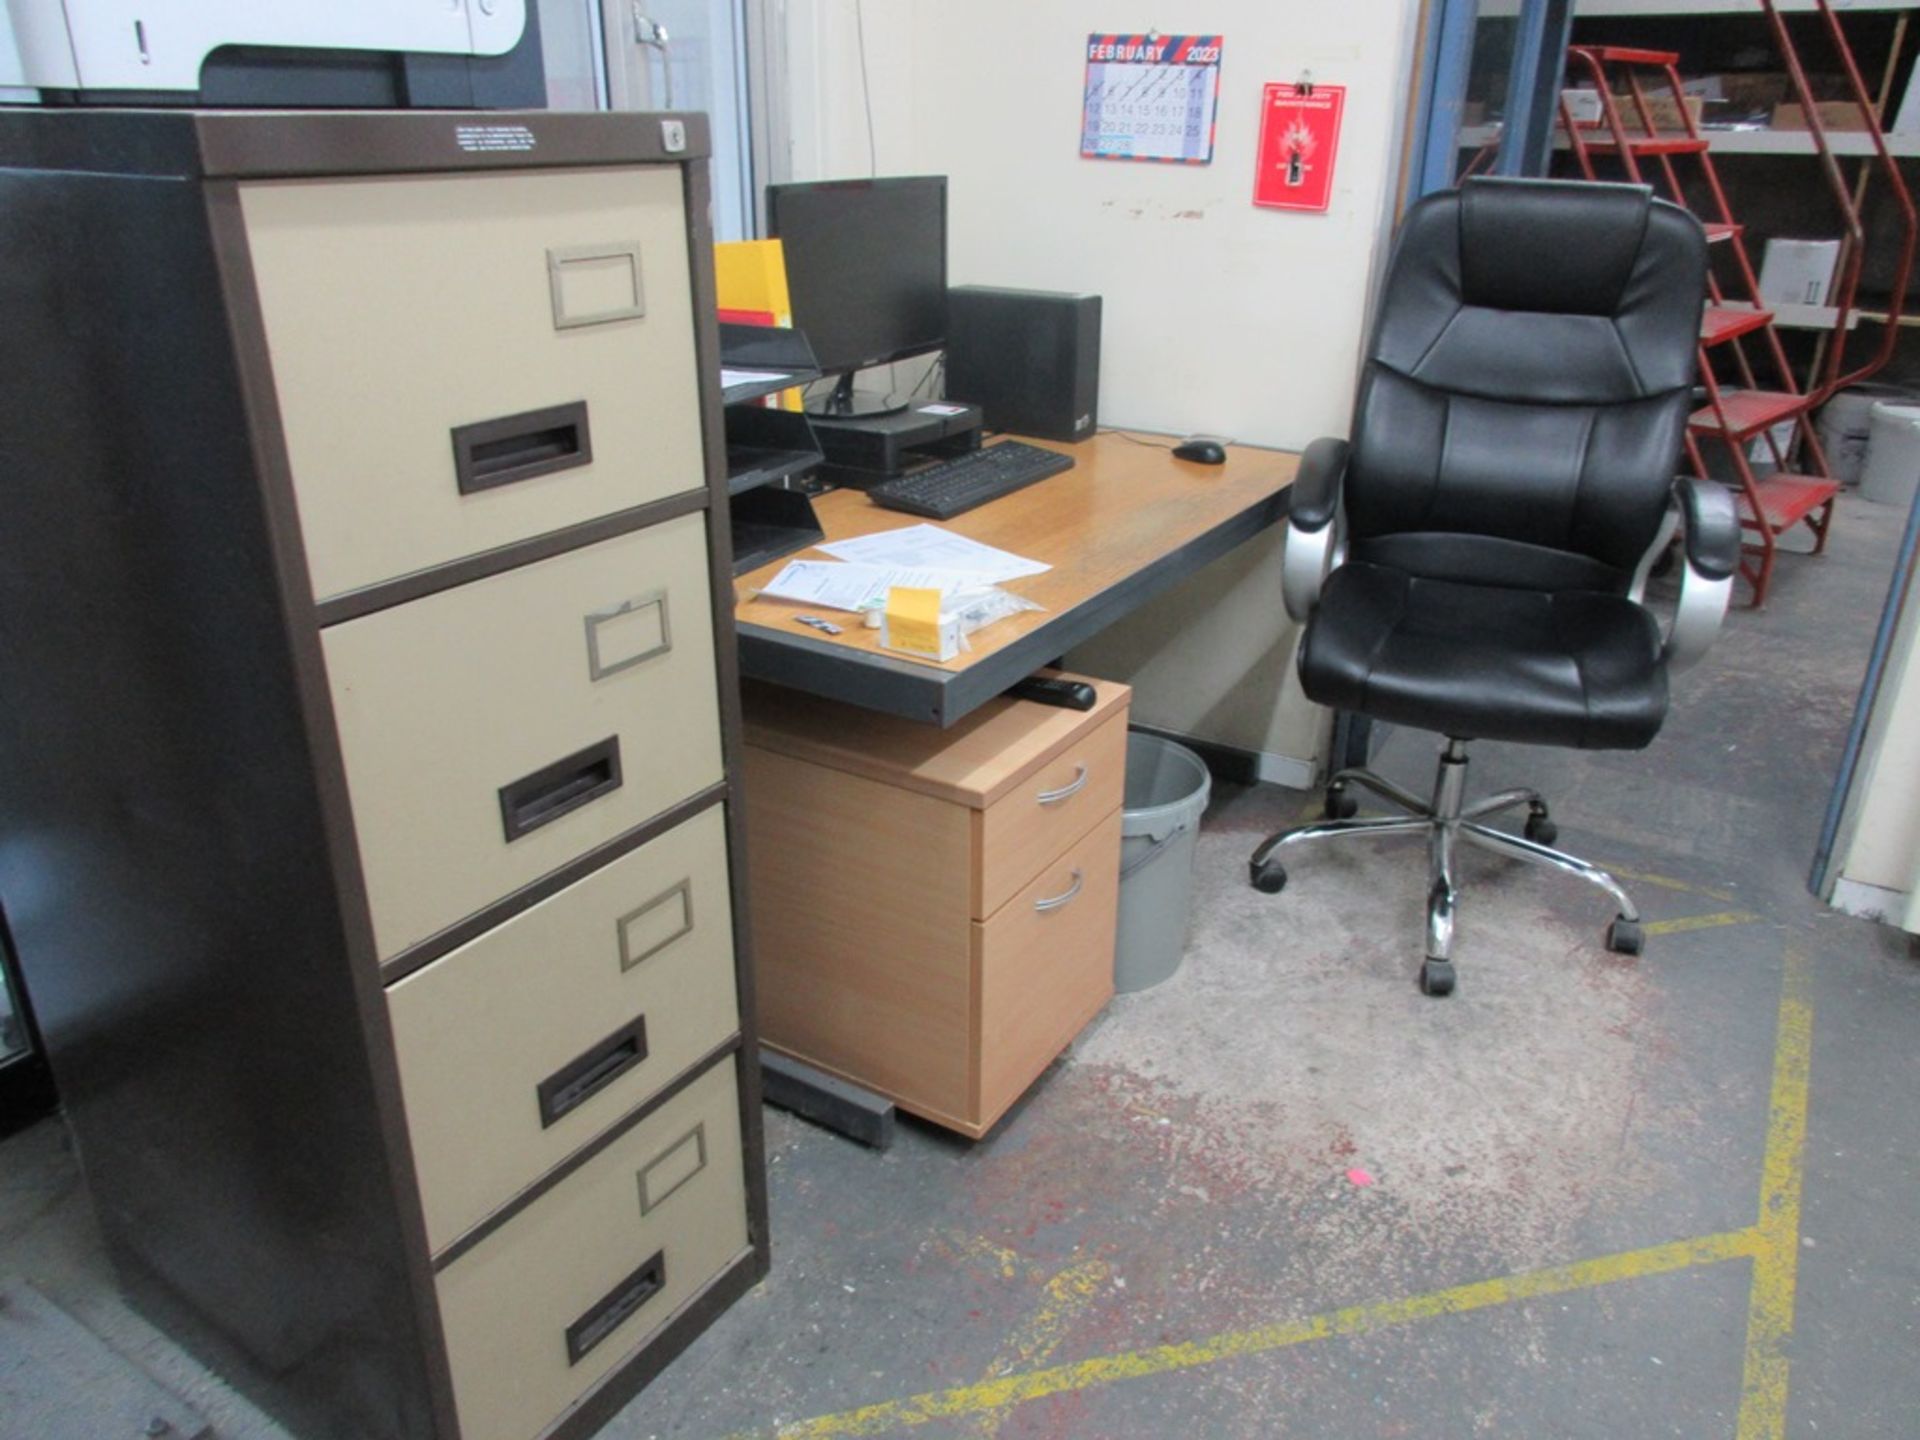 Remaining loose contents of office including 2 x metal 4 drawer filing cabinets, 2 x straight desks, - Image 2 of 3